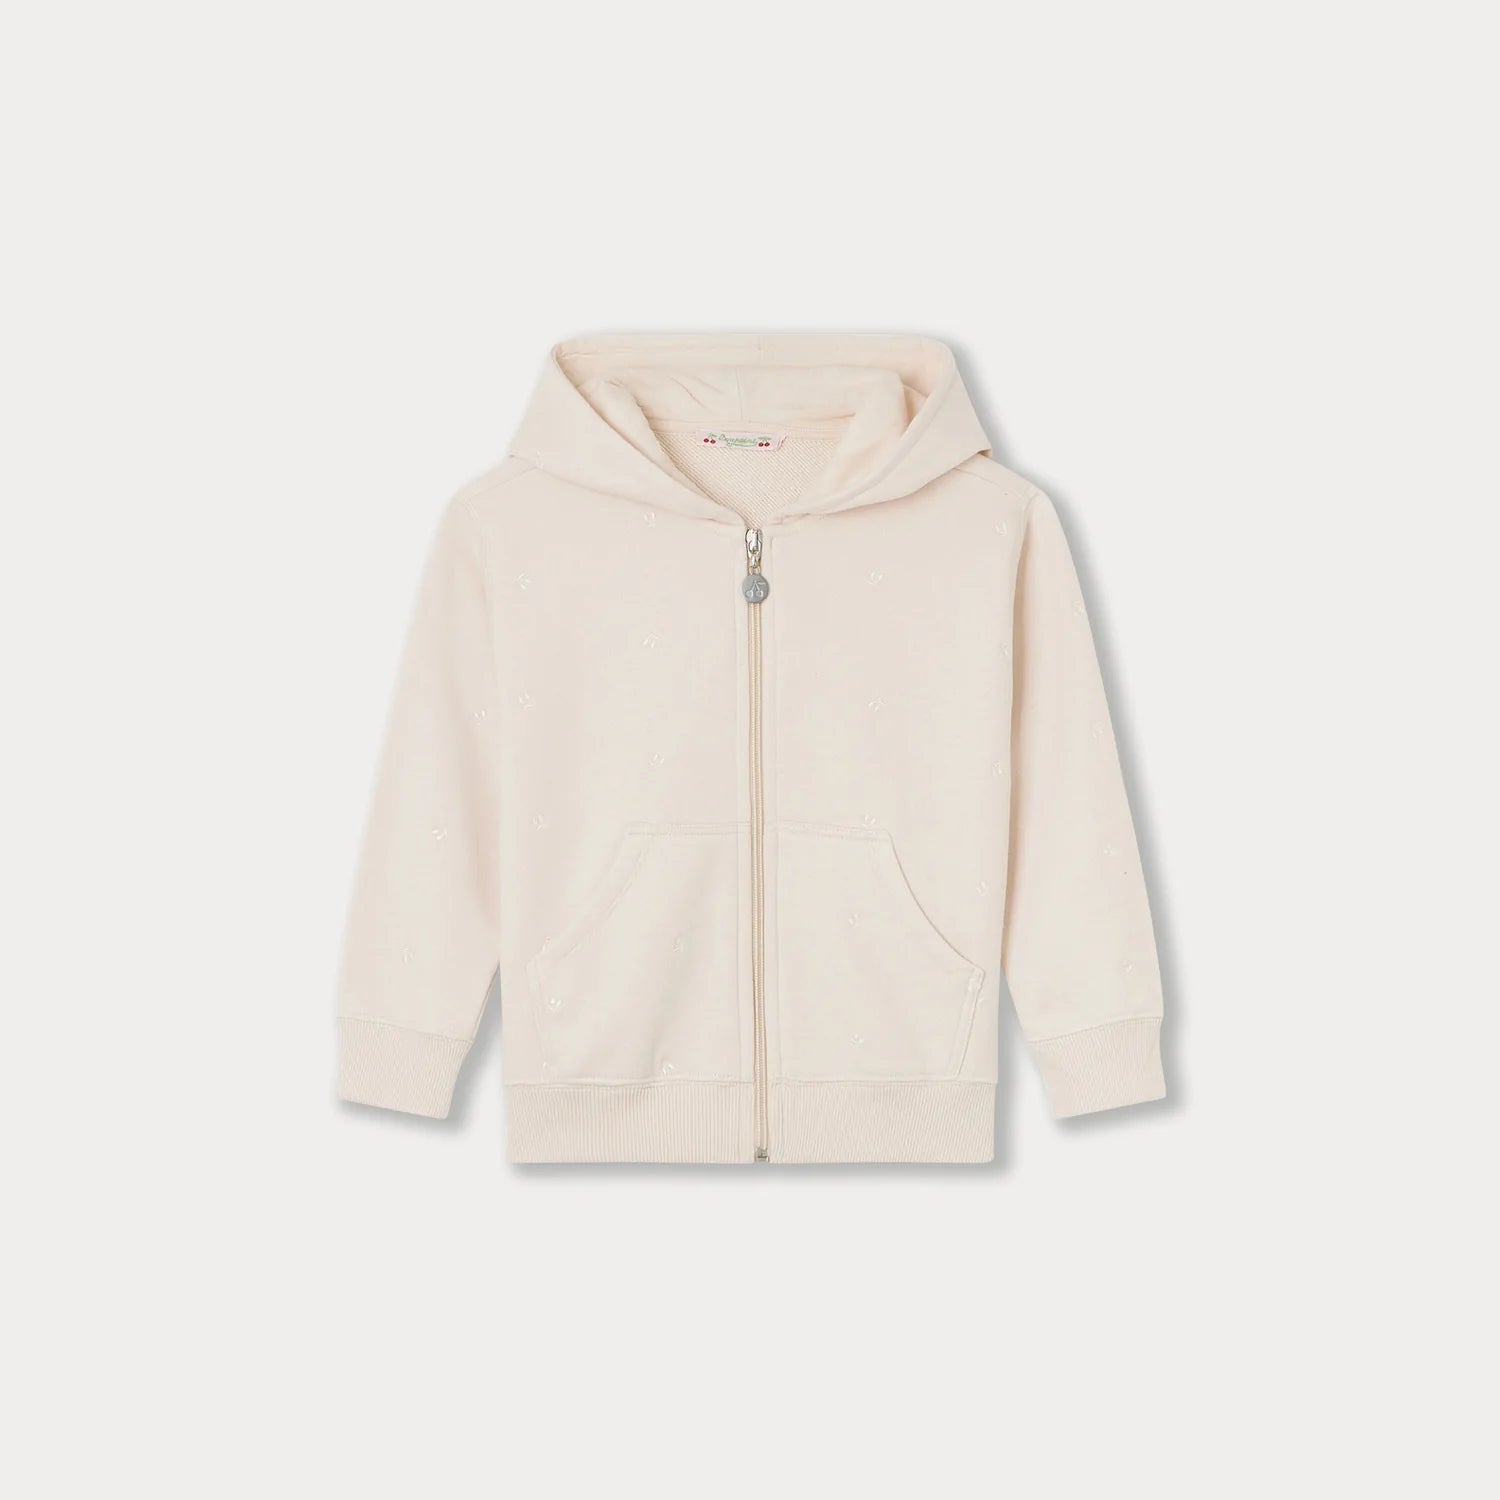 Girls White Hooded Zip-Up Top